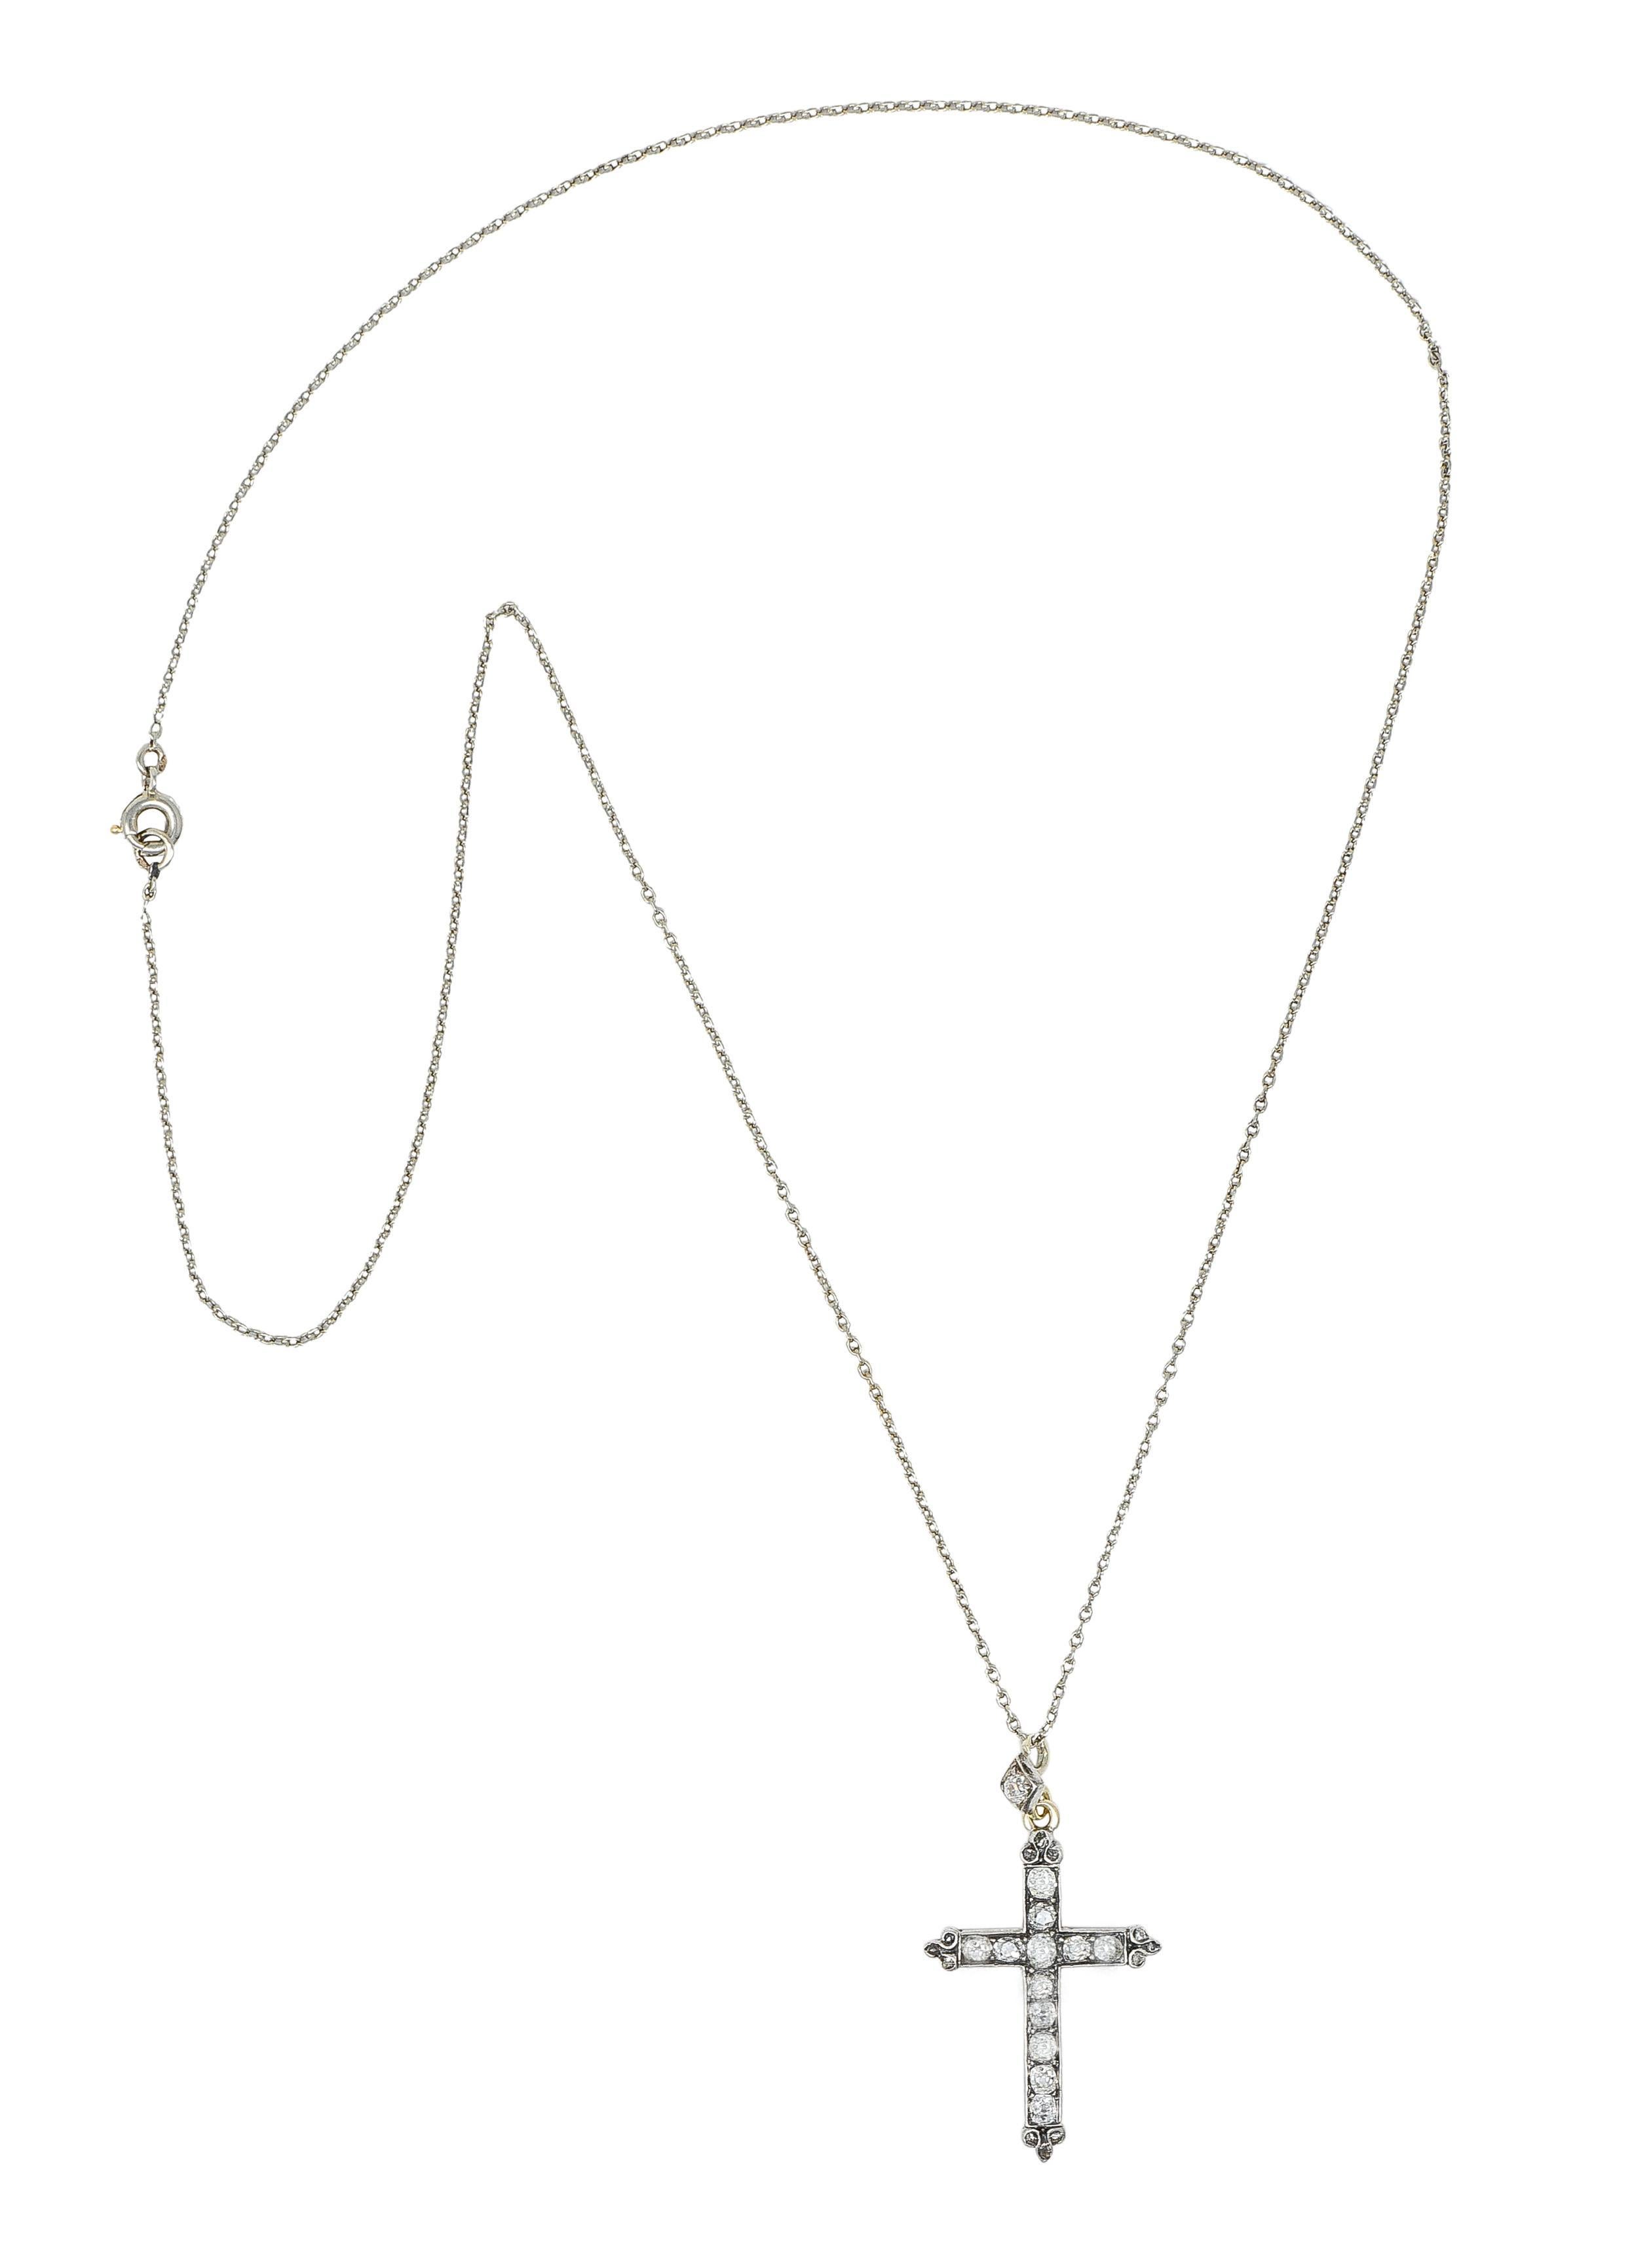 Designed as a 1.5 mm cable link white gold chain suspending a stylized silver-topped cross pendant 
With a diamond-shaped surmount and featuring bead set old mine and rose cut diamonds
Weighing approximately 0.95 carat total - I to M in color and